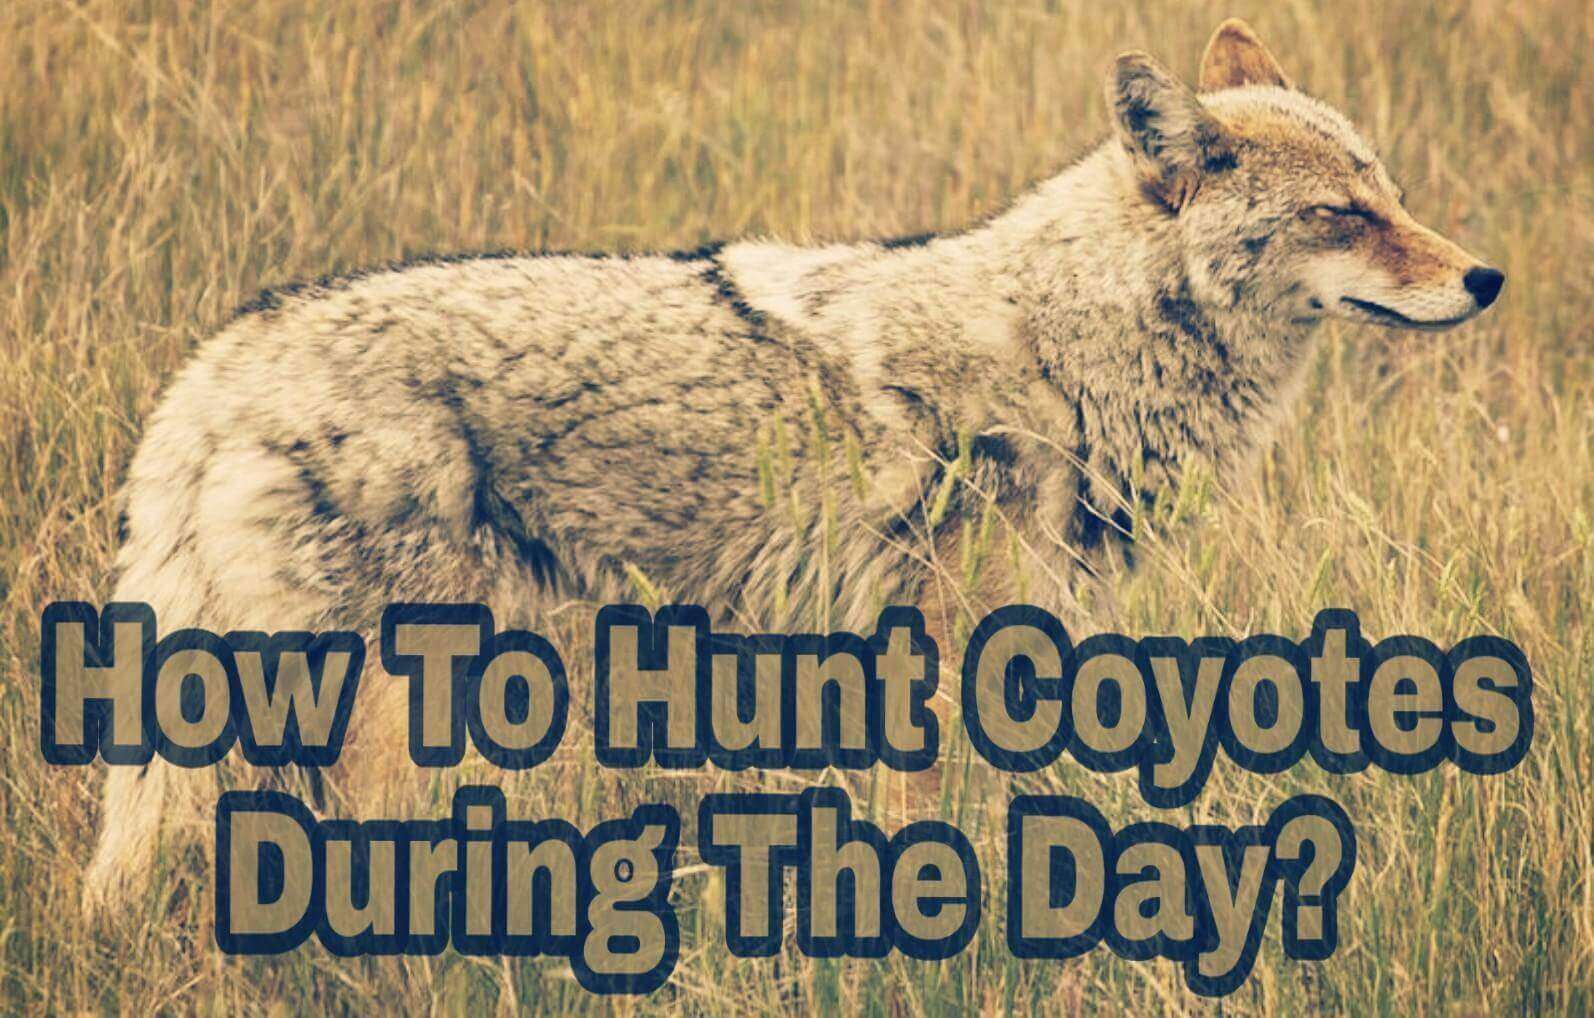 How To Hunt Coyotes During The Day?